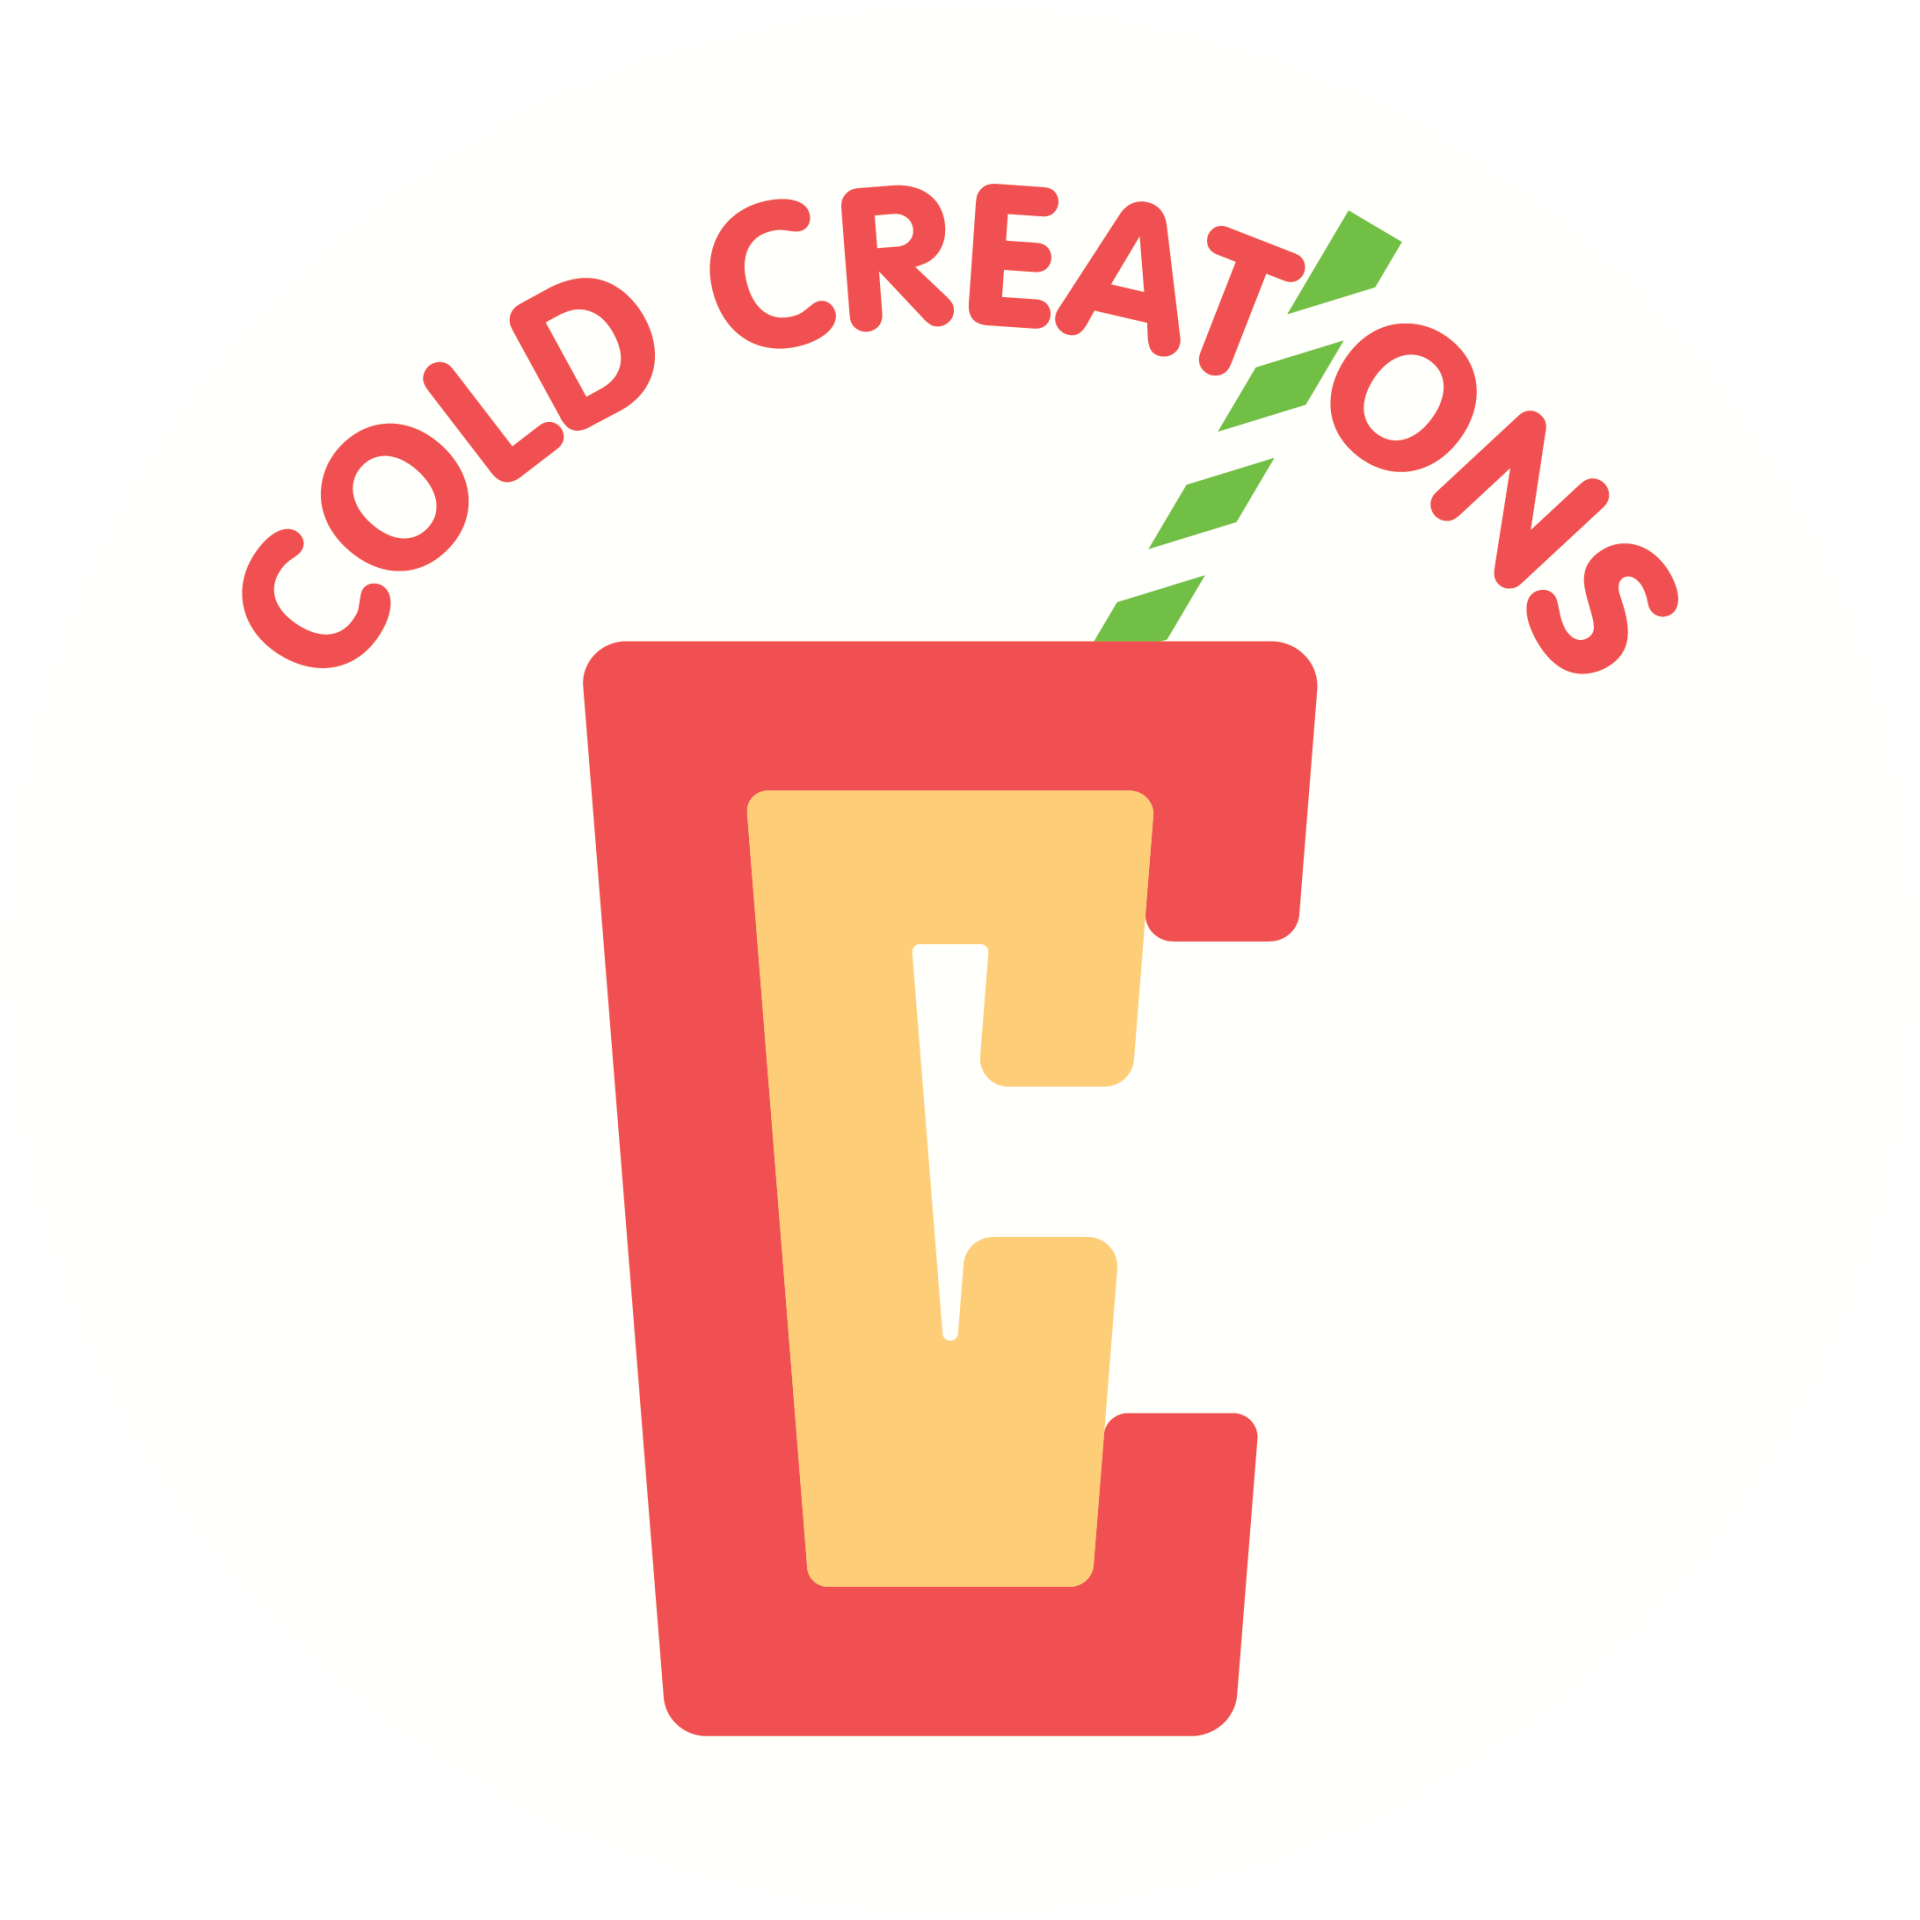 Cold Creations logo